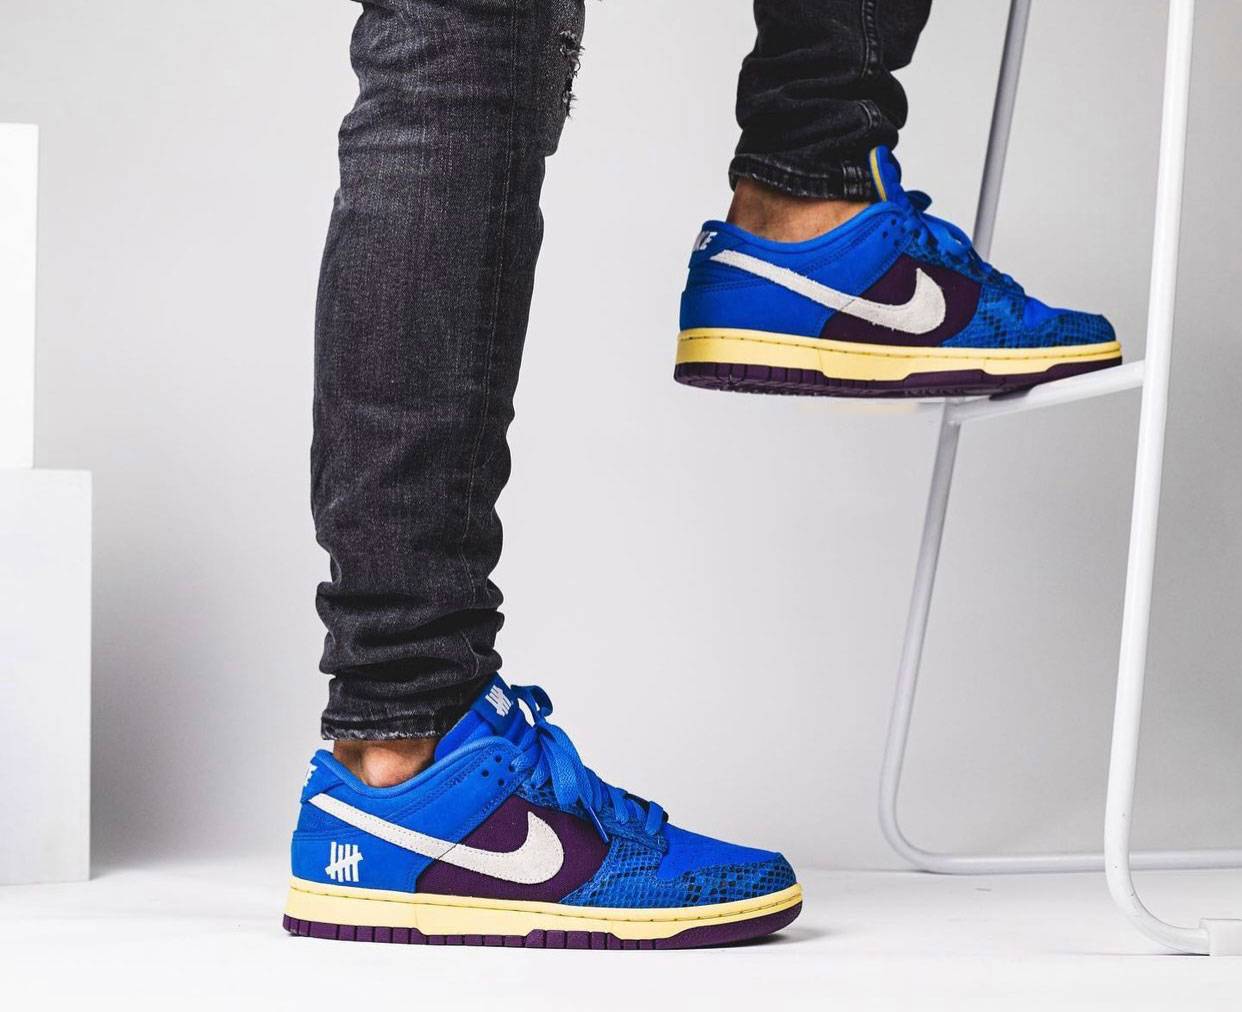 Undefeated-Nike-Dunk-Low-DH6508-400-On-Feet-3